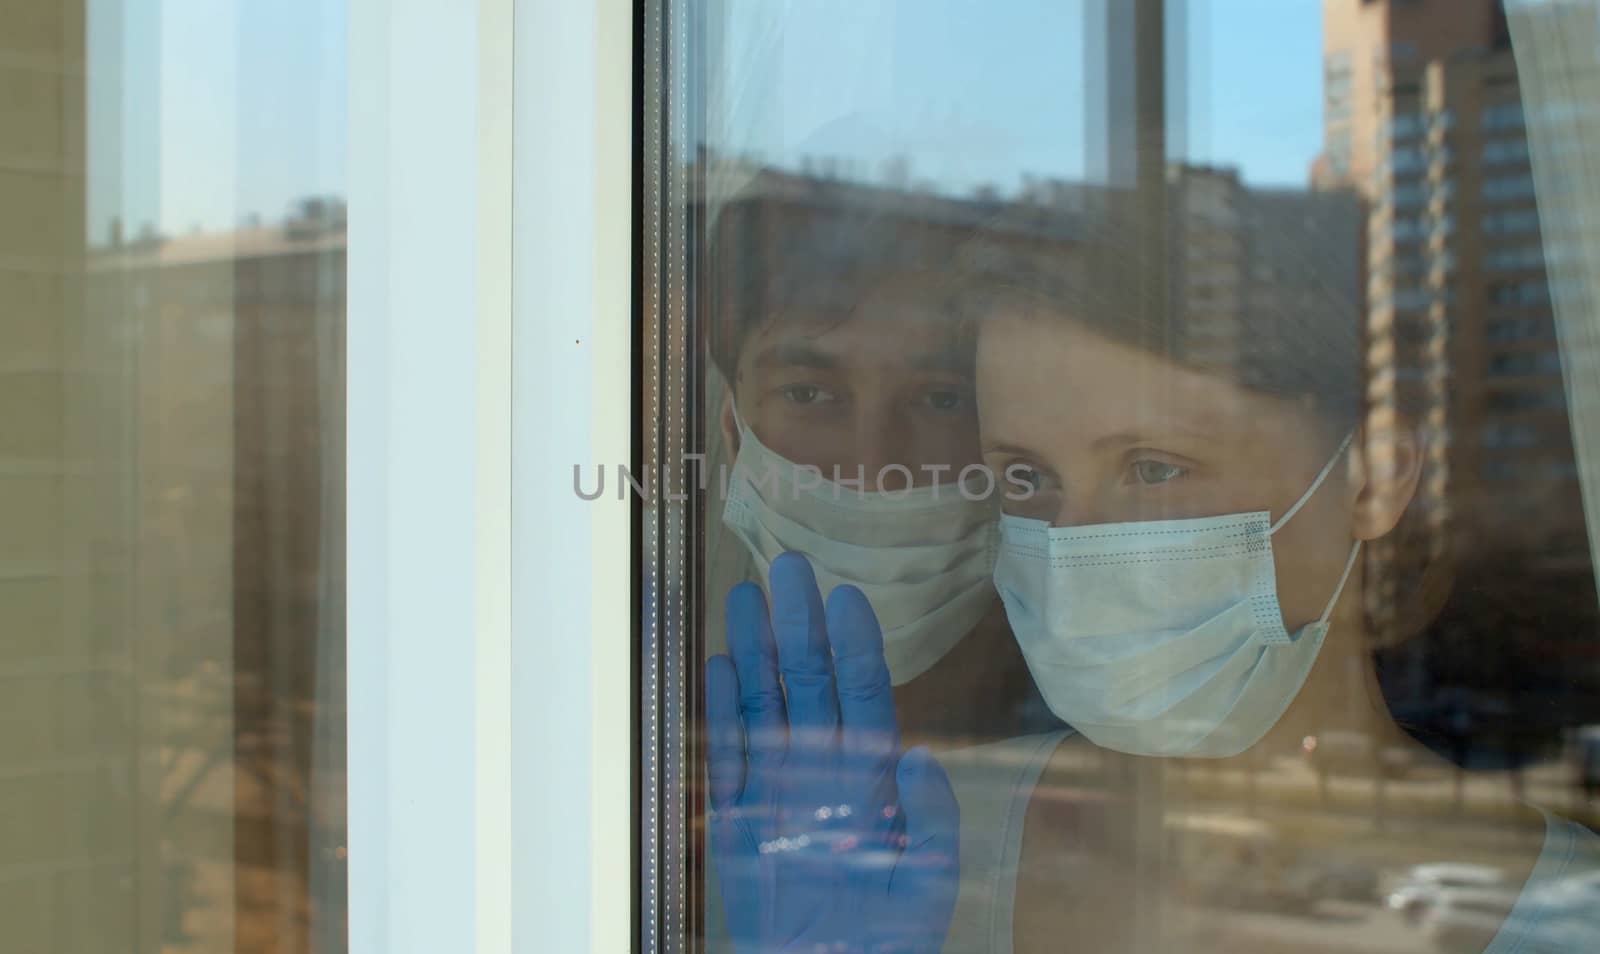 Young family portrait through the window. They are in protective masks and gloves during coronavirus quarantine. Traffic and buildings are reflected in the window glass. Covid-19 epidemic